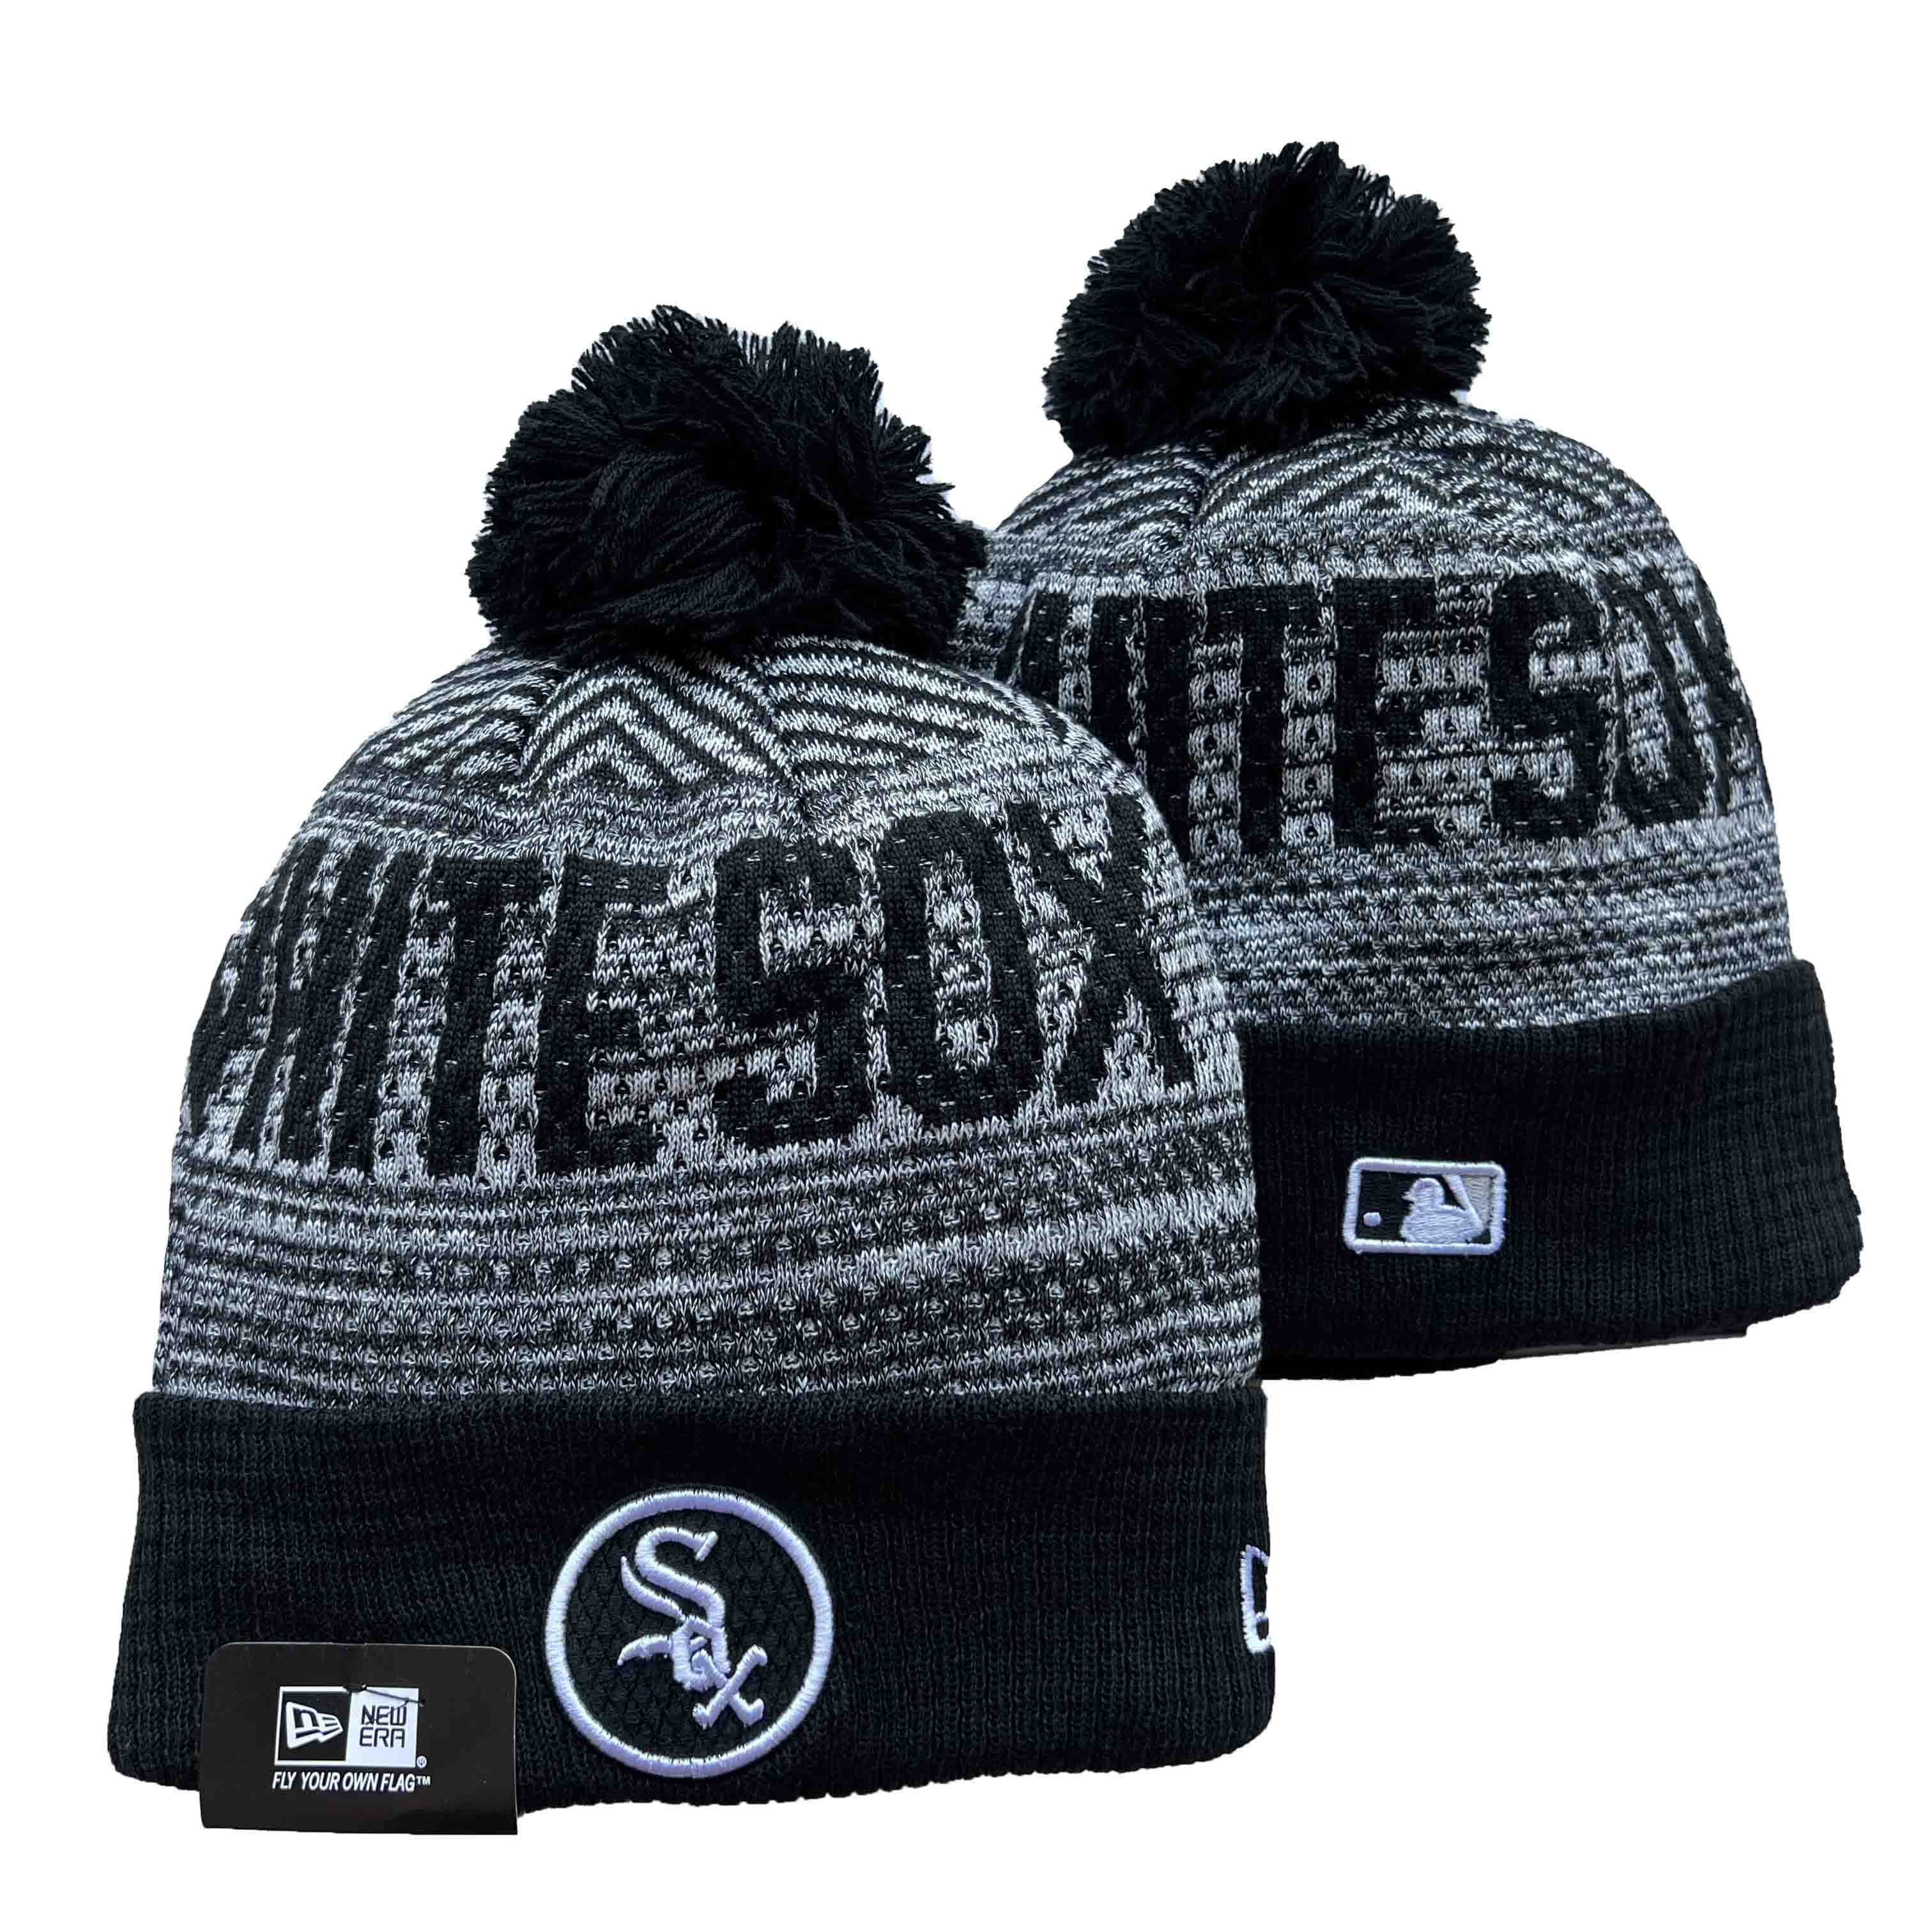 MLB Chicago White Sox Beanies Knit Hats-YD111